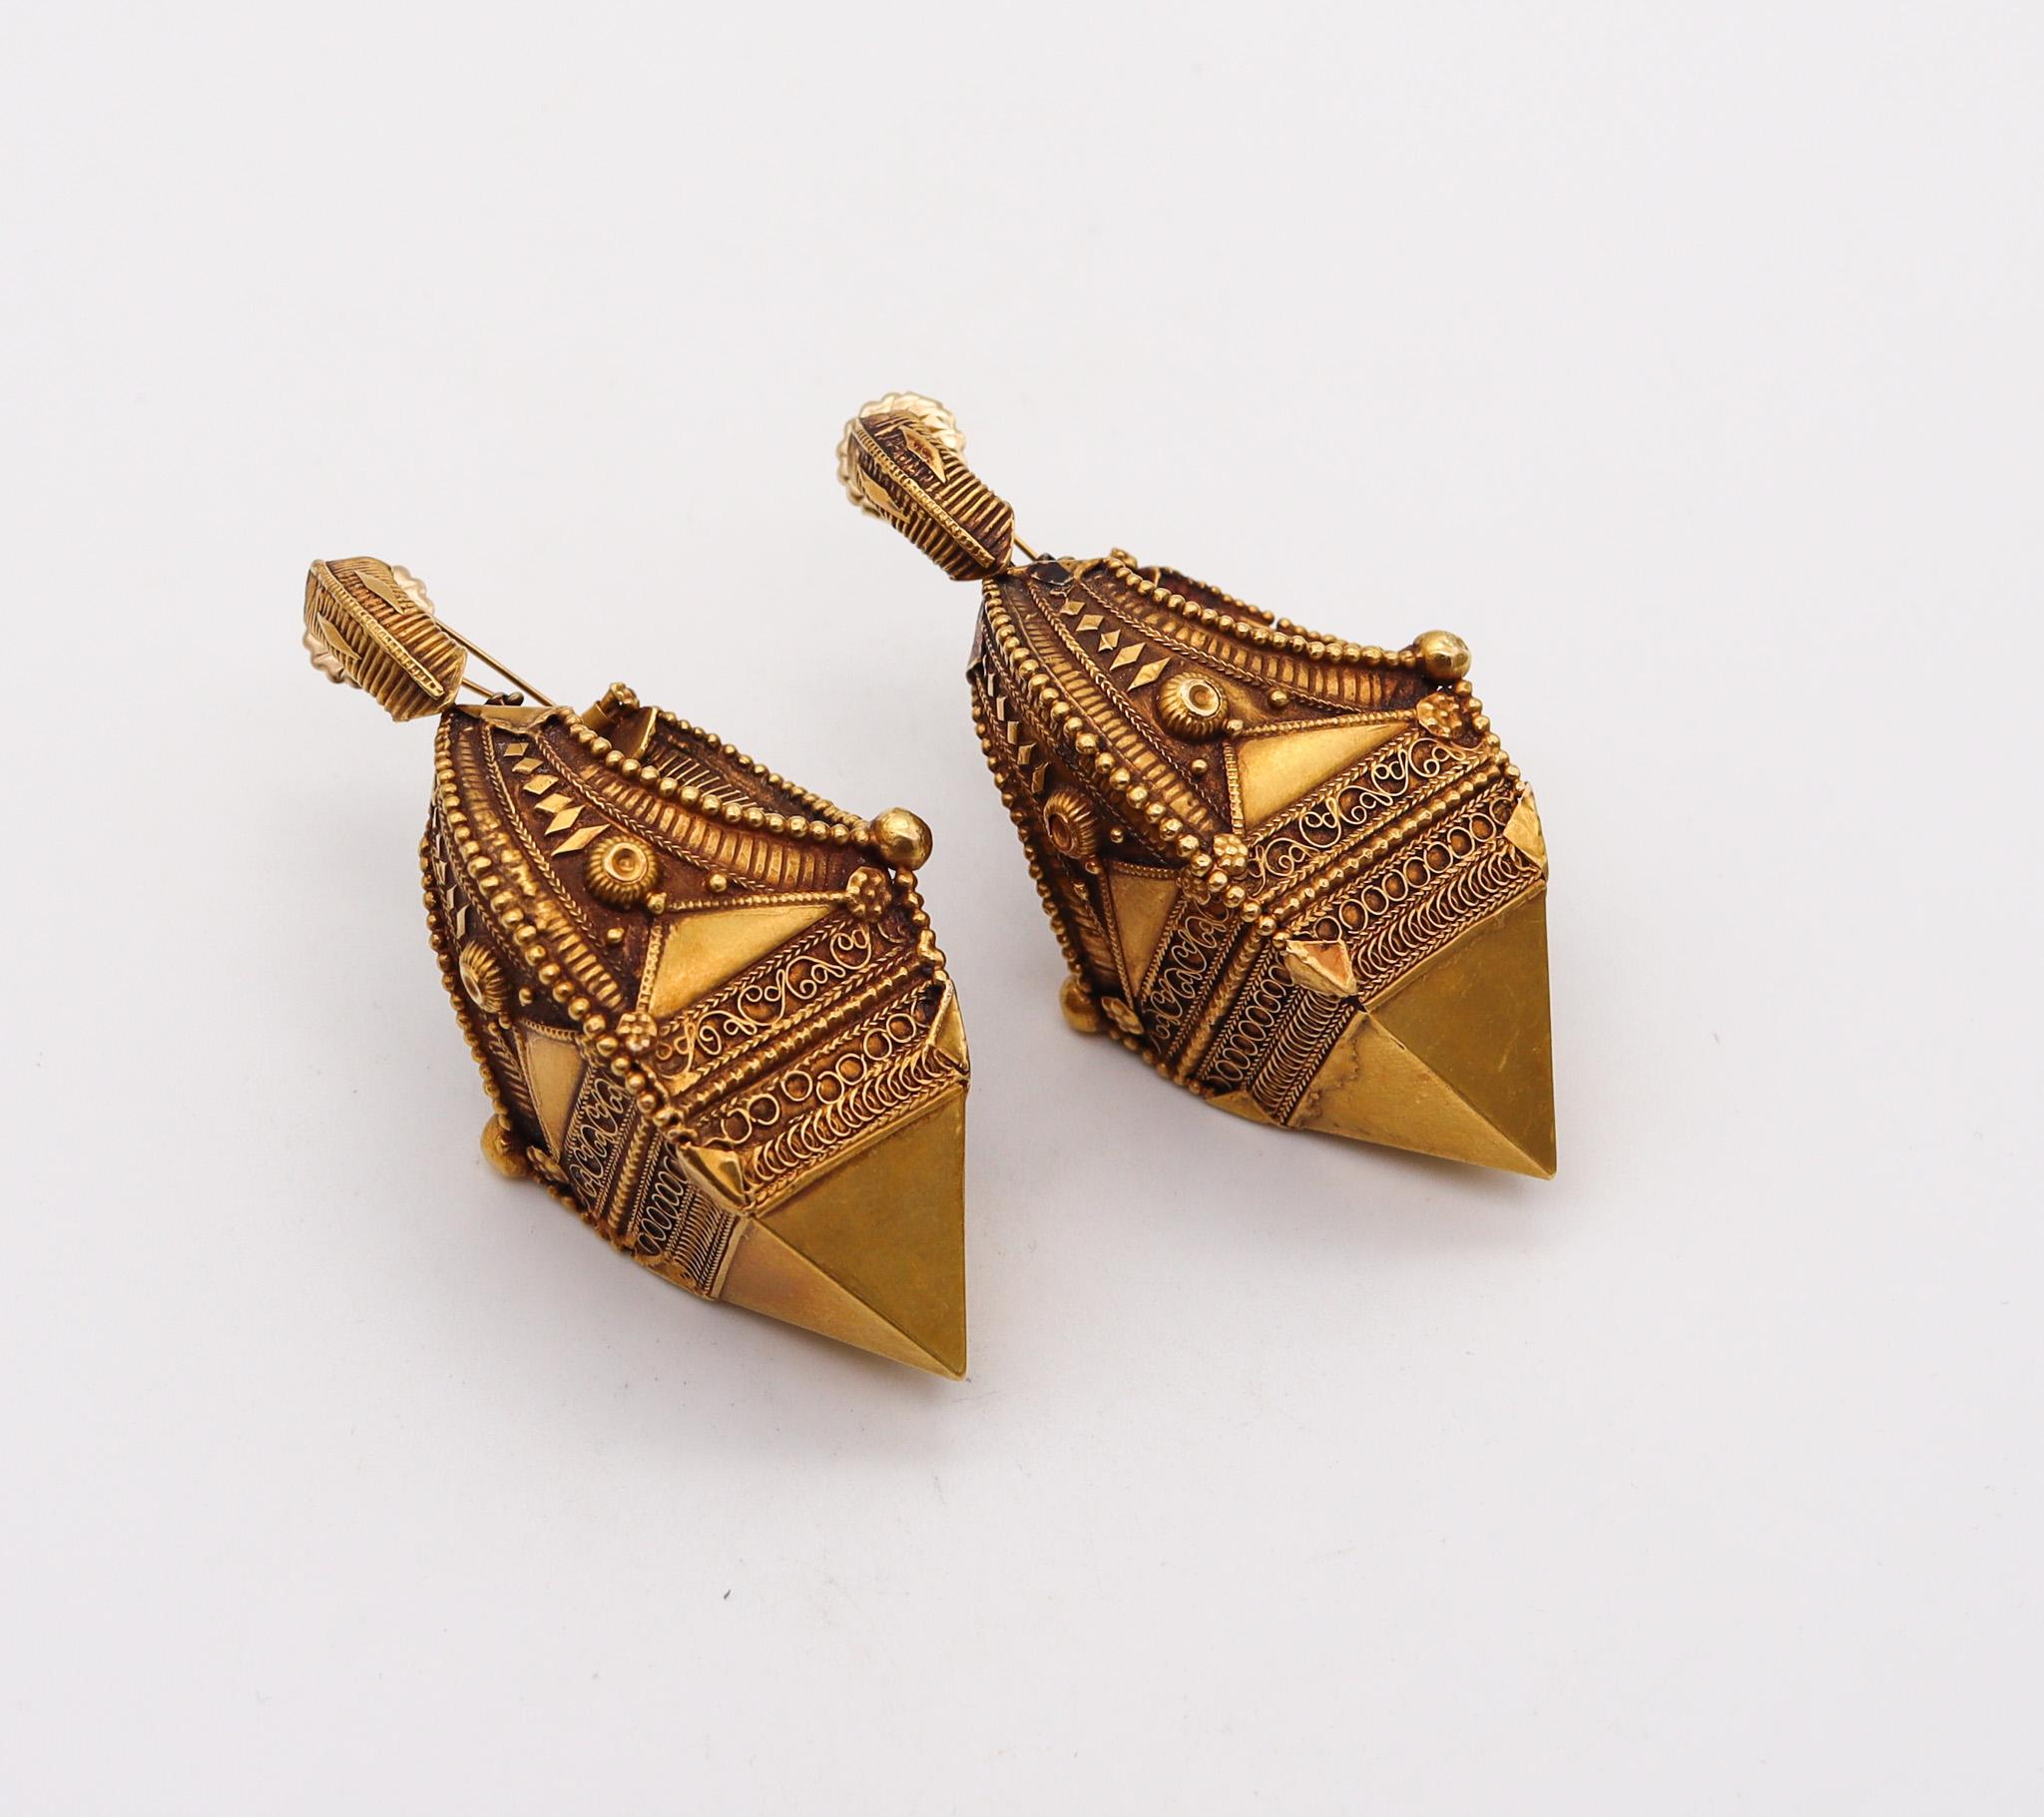 Southern India 19th century dangle earrings

Fabulous, statements oversized dangle earrings, made during the middle of the 19th century in the southern kingdoms of India. These antique earrings have been carefully crafted in three-dimensions in rich